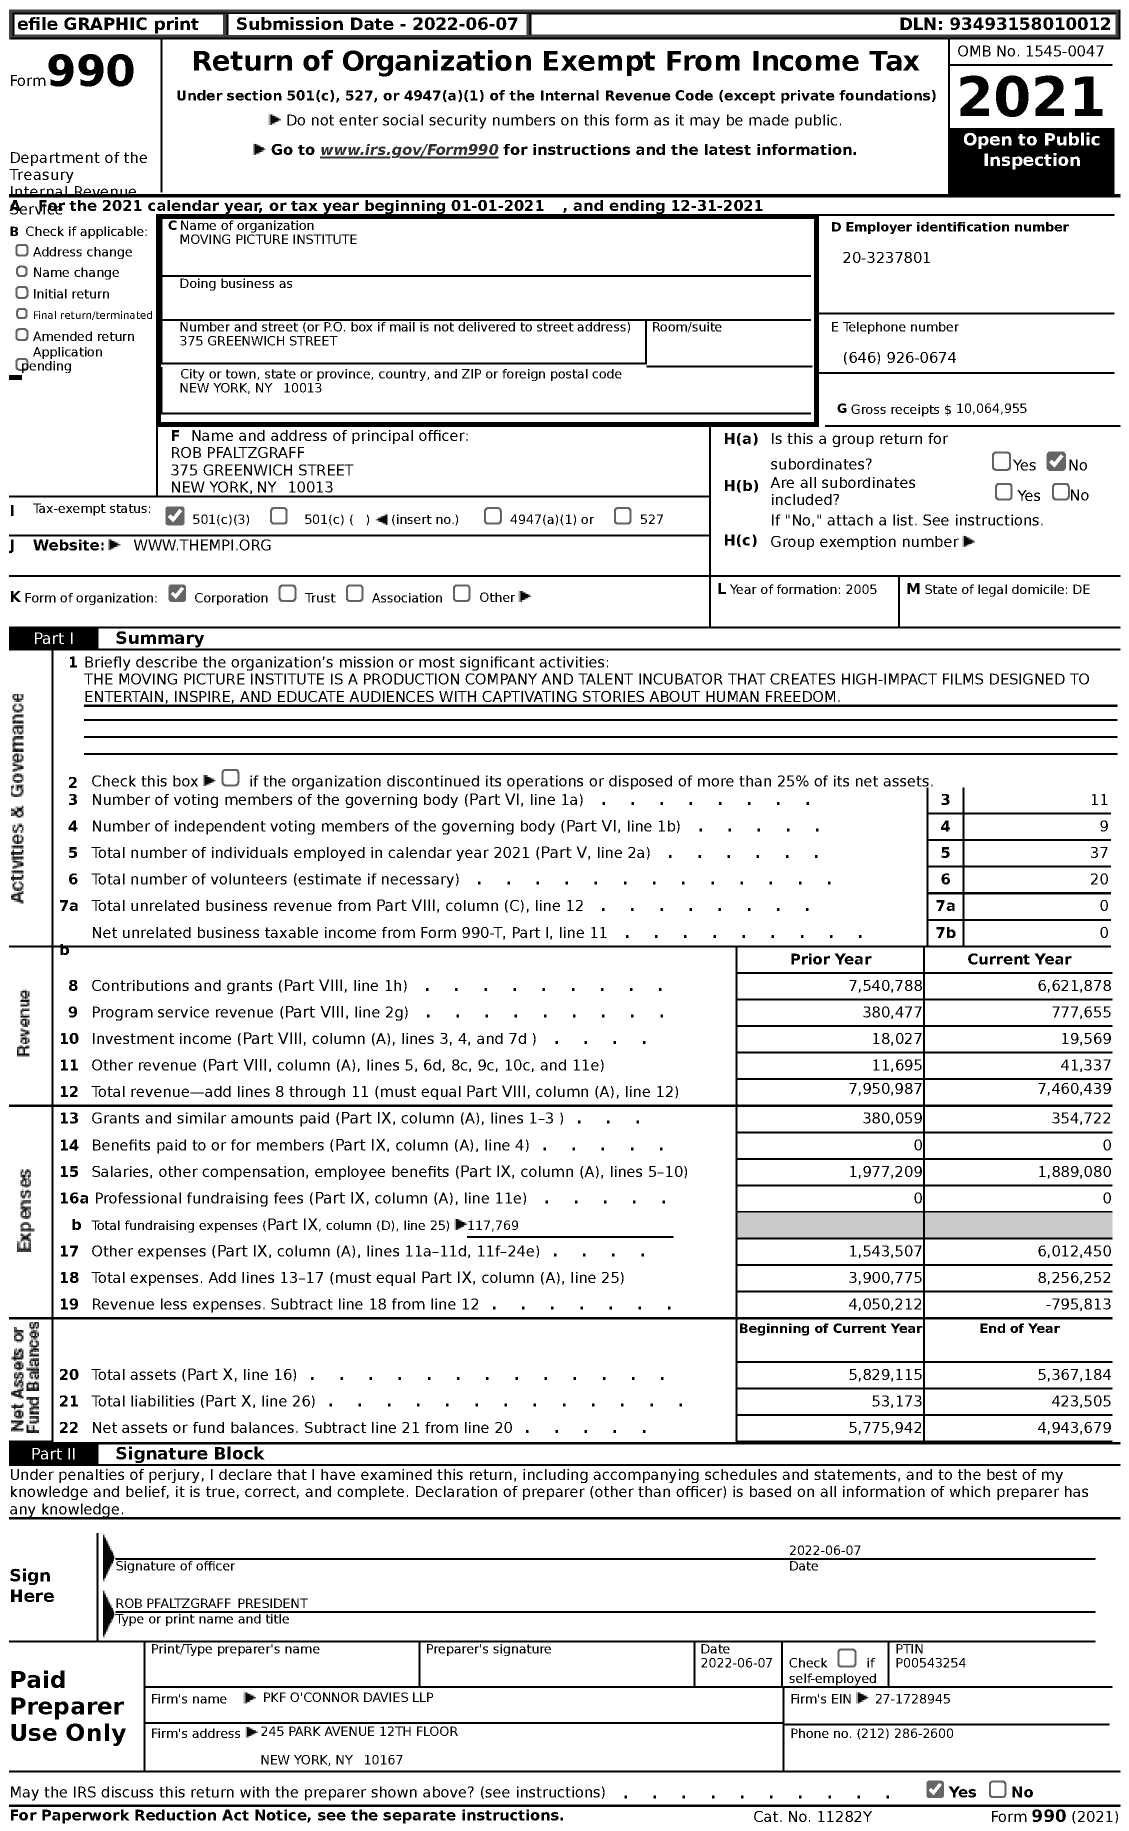 Image of first page of 2021 Form 990 for Moving Pictures Institute (MPI)